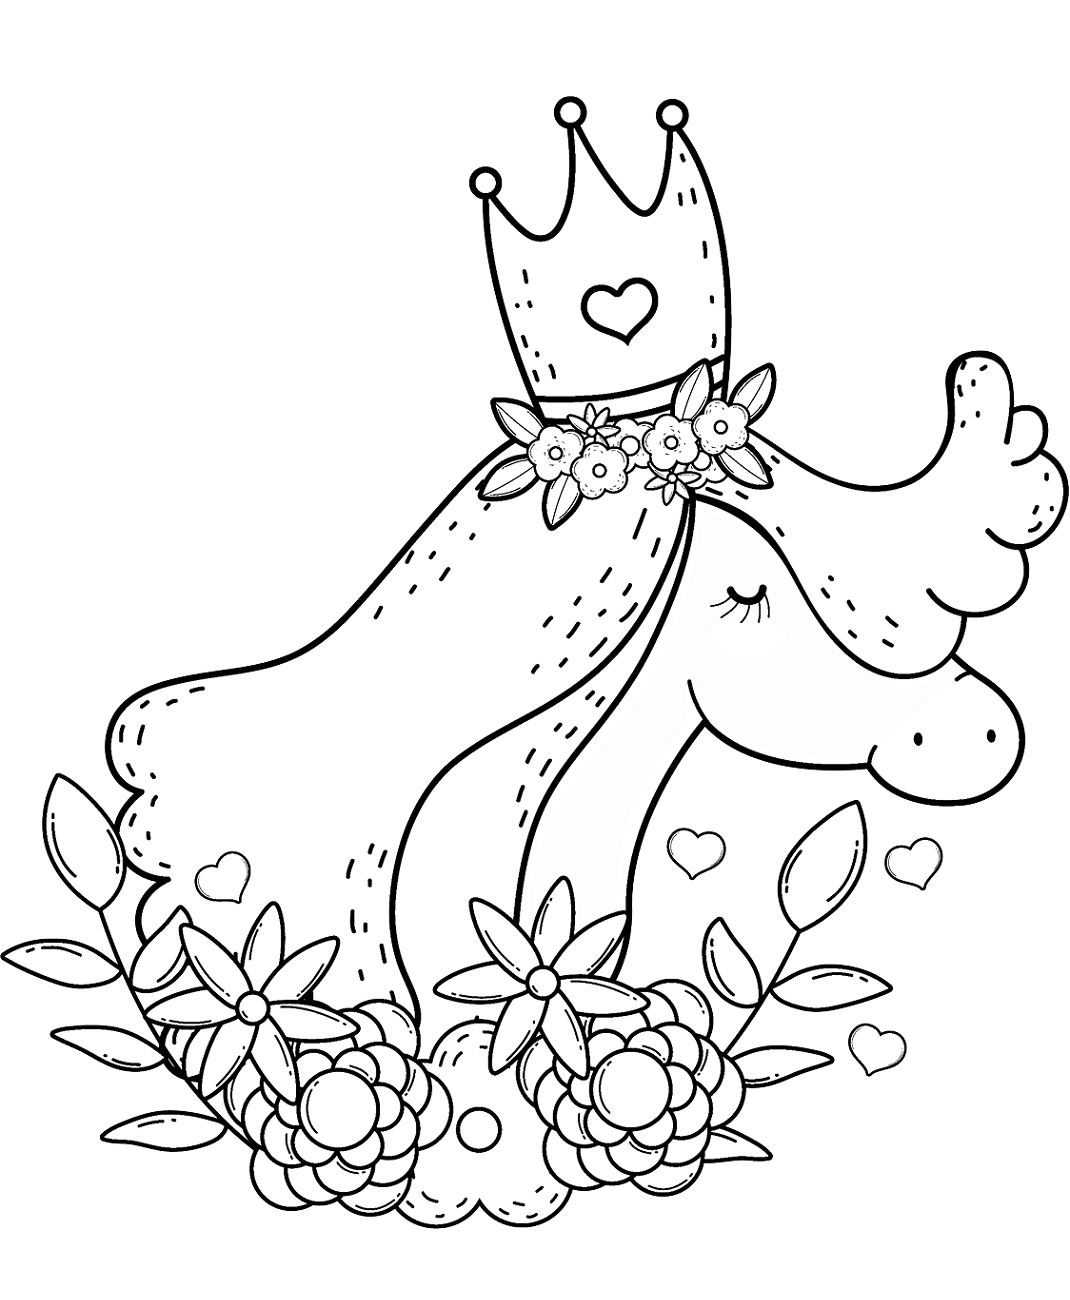 Unicorn Wearing Crown Coloring Page